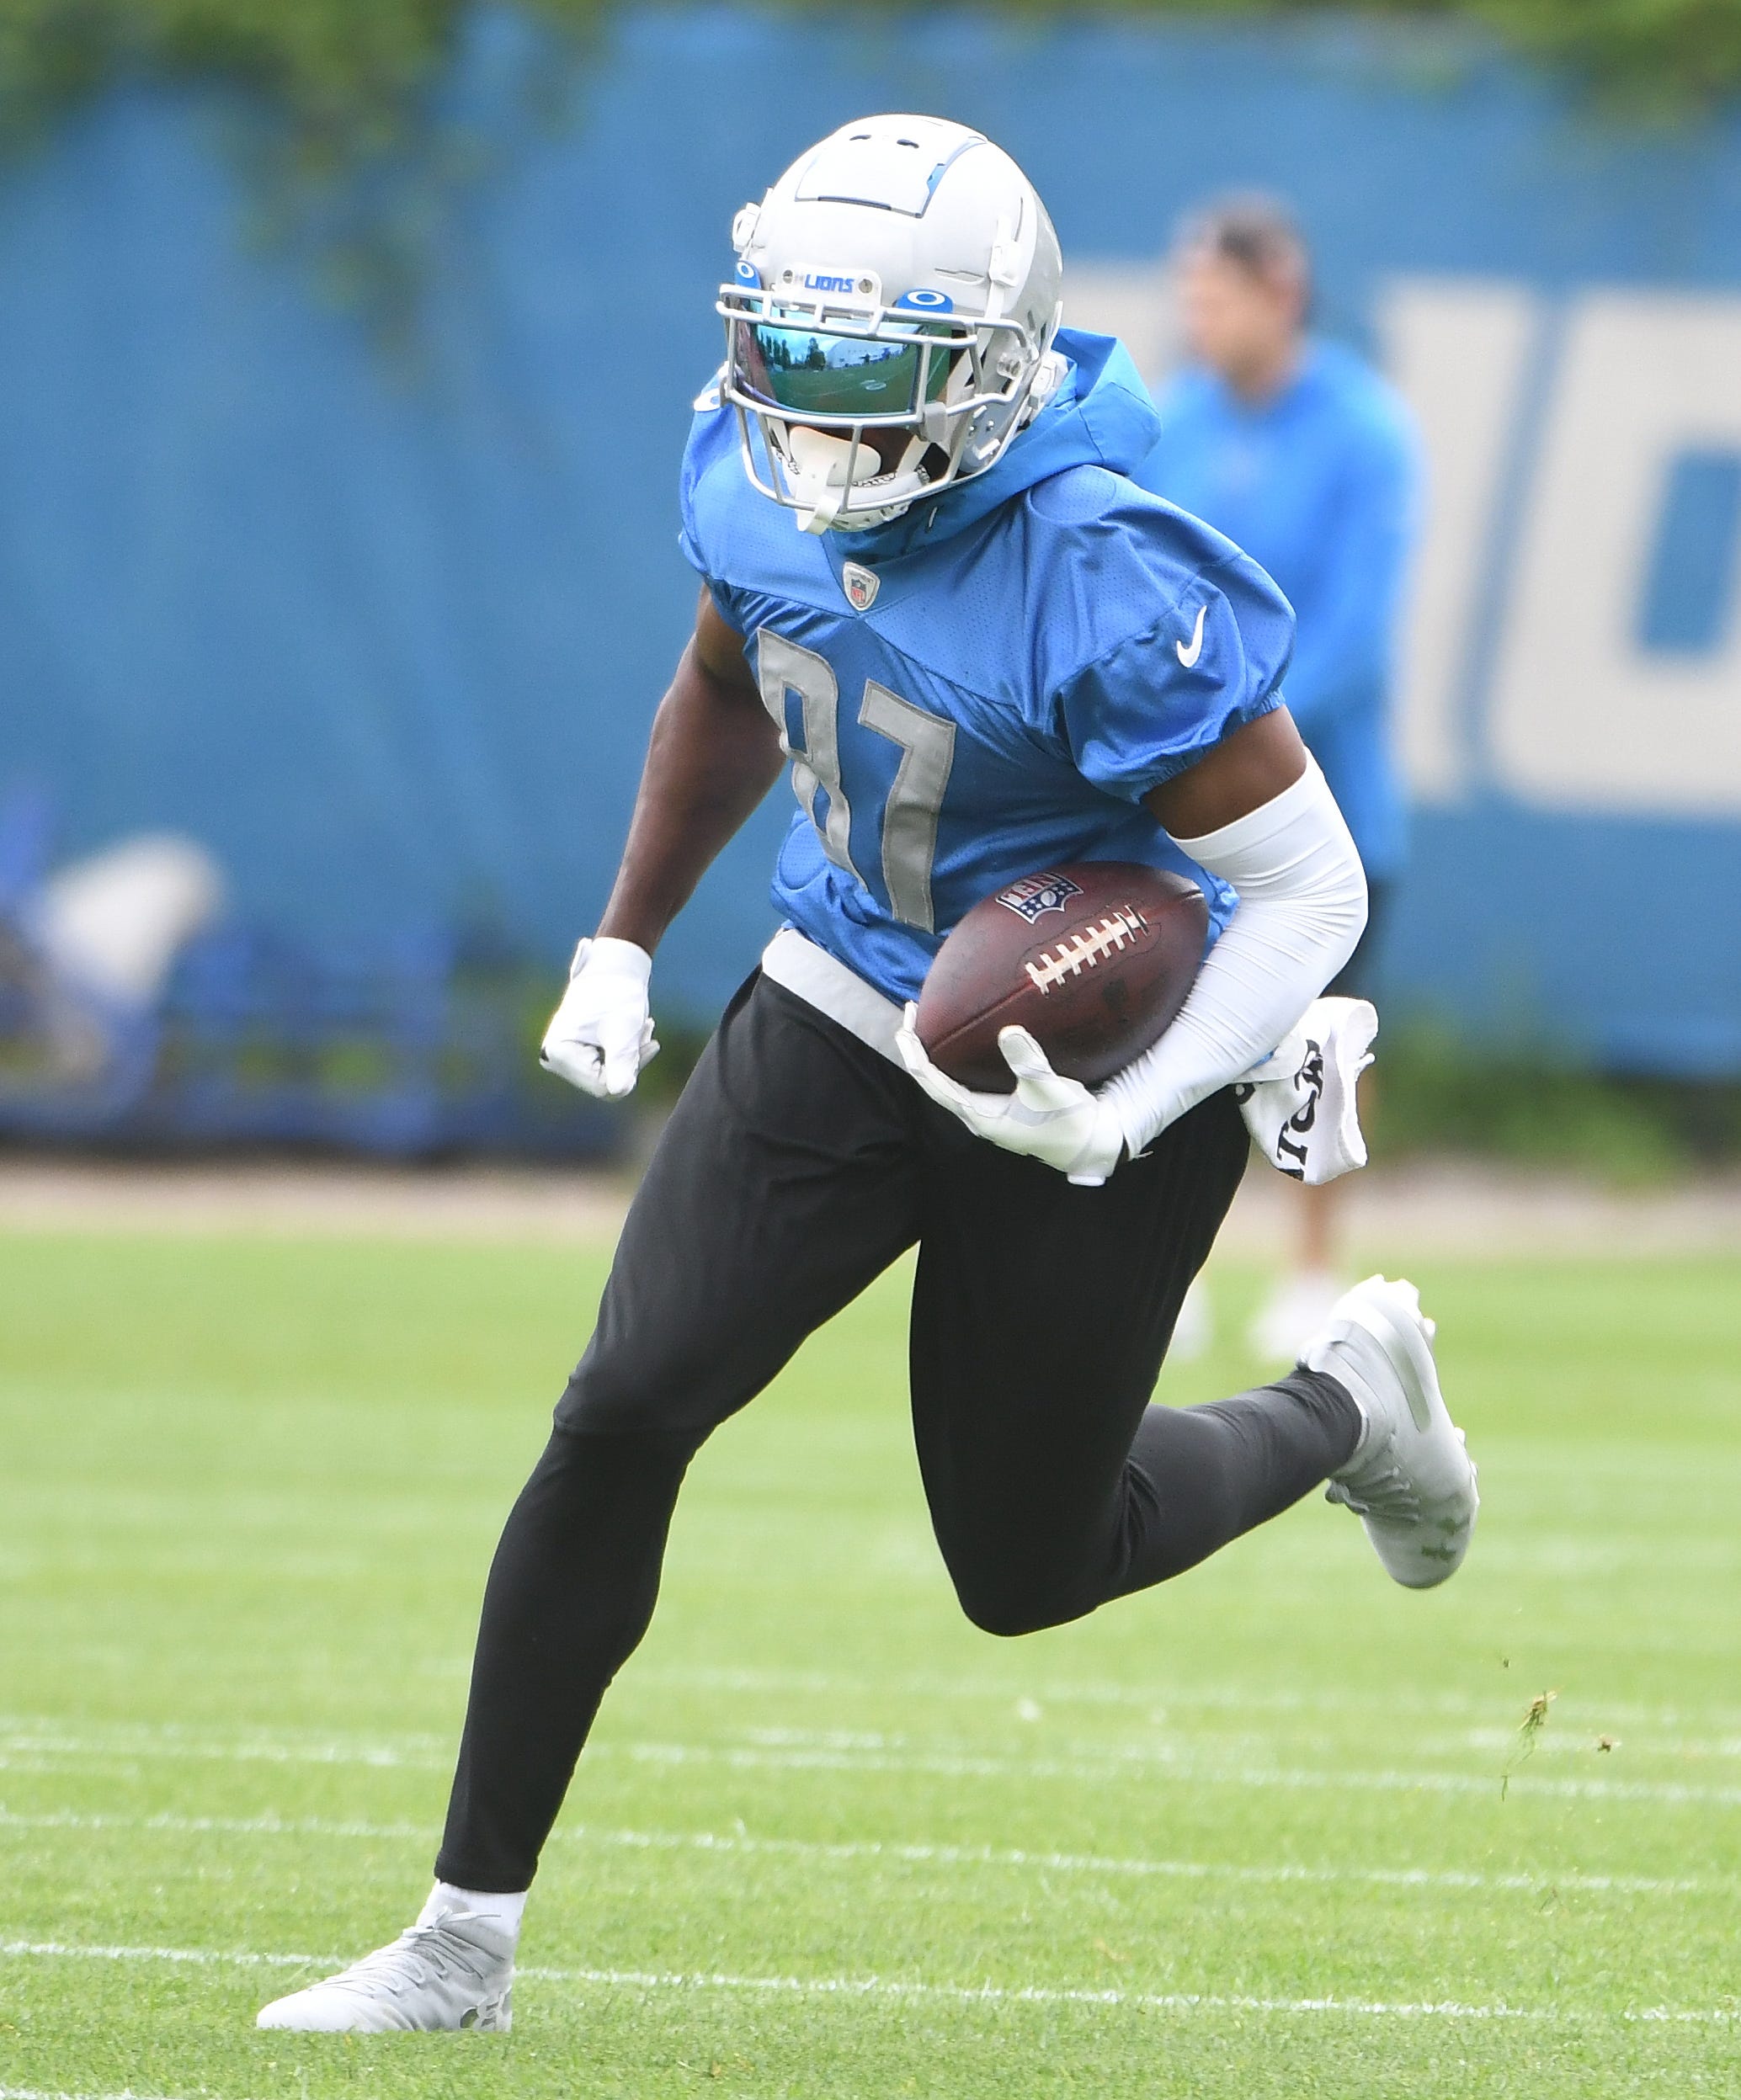 Former Lions receiver Quintez Cephus is among five players the NFL has reportedly reinstated after indefinite gambling suspensions.